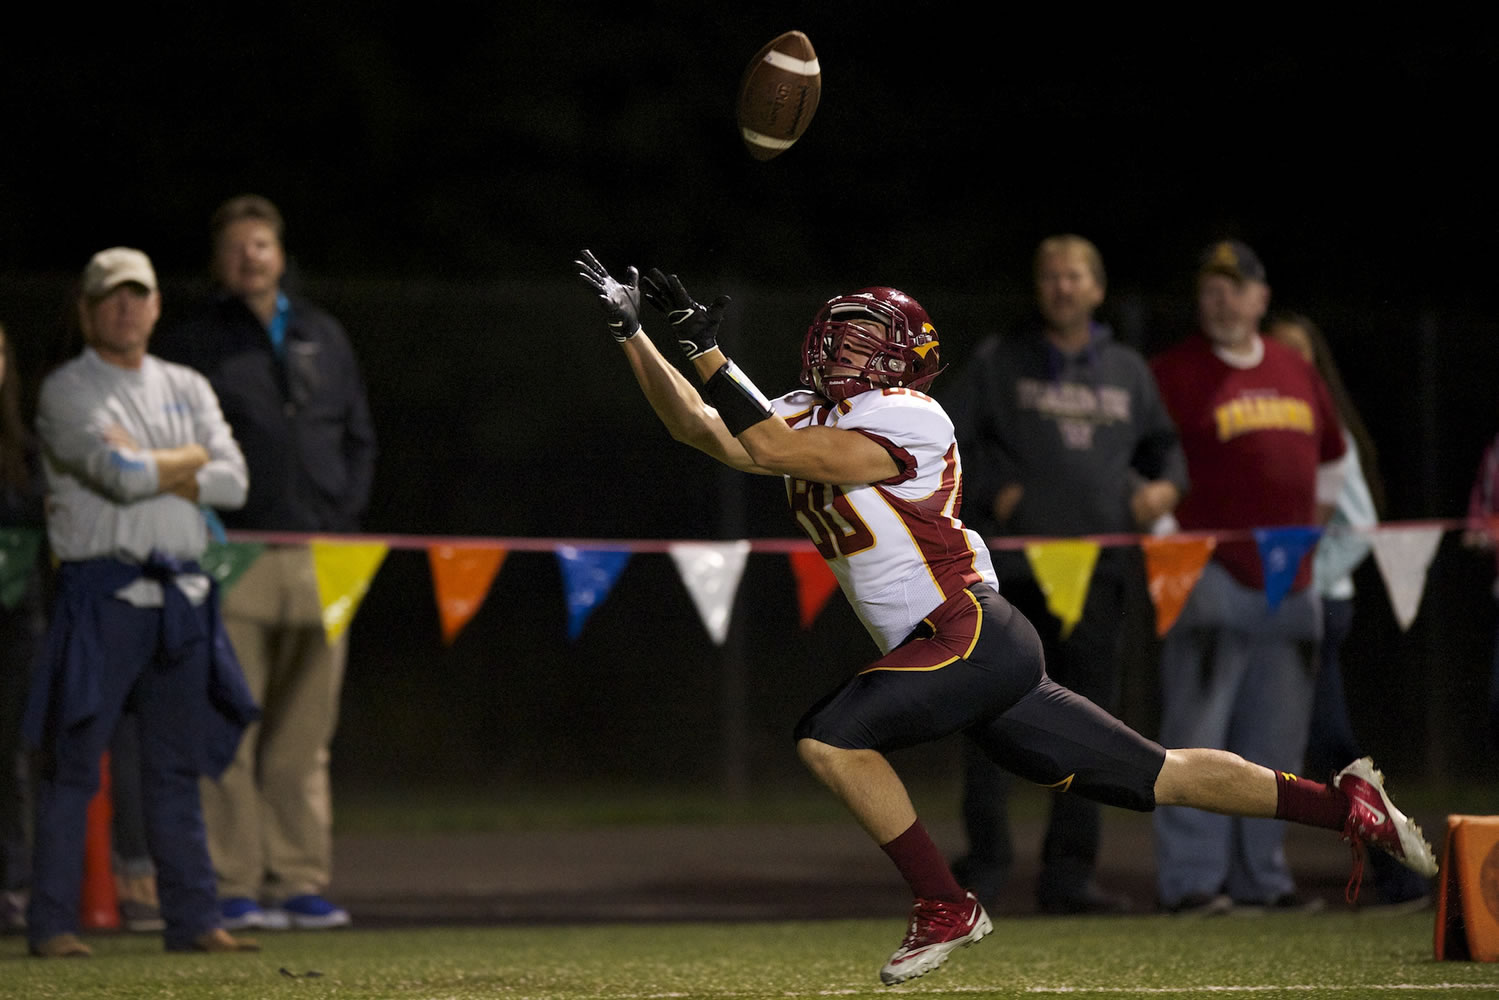 Taylor Martin of Prairie High School catches a touchdown pass against Skyview at Kiggins Bowl on Friday.